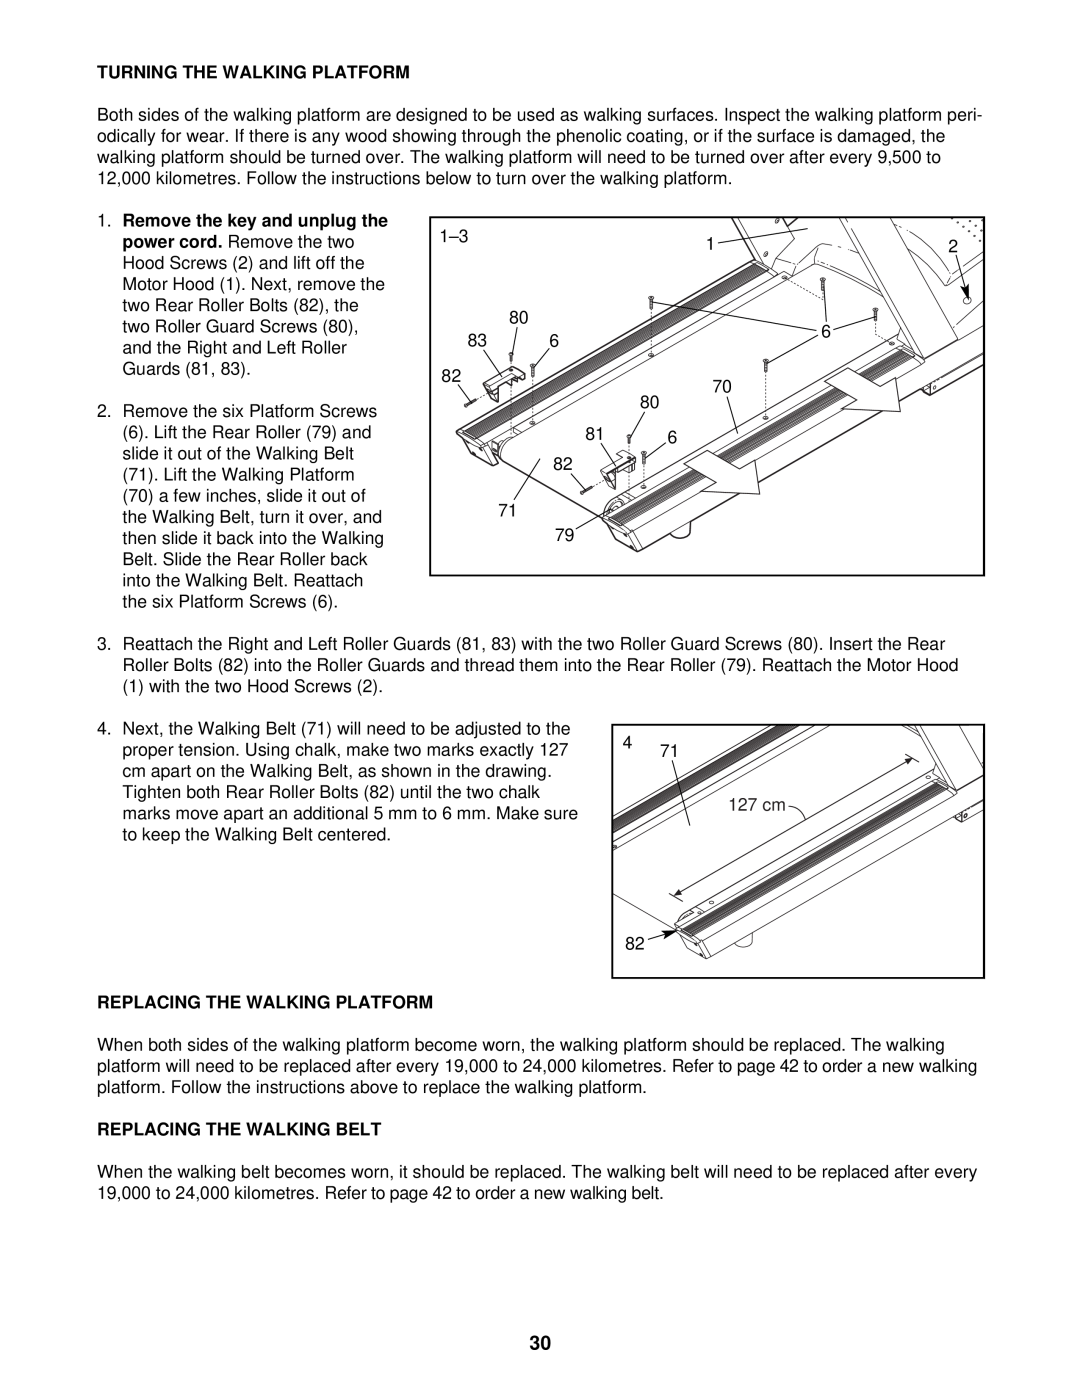 NordicTrack 9600 user manual Turning The Walking Platform, Remove the key and unplug the, Replacing The Walking Platform 